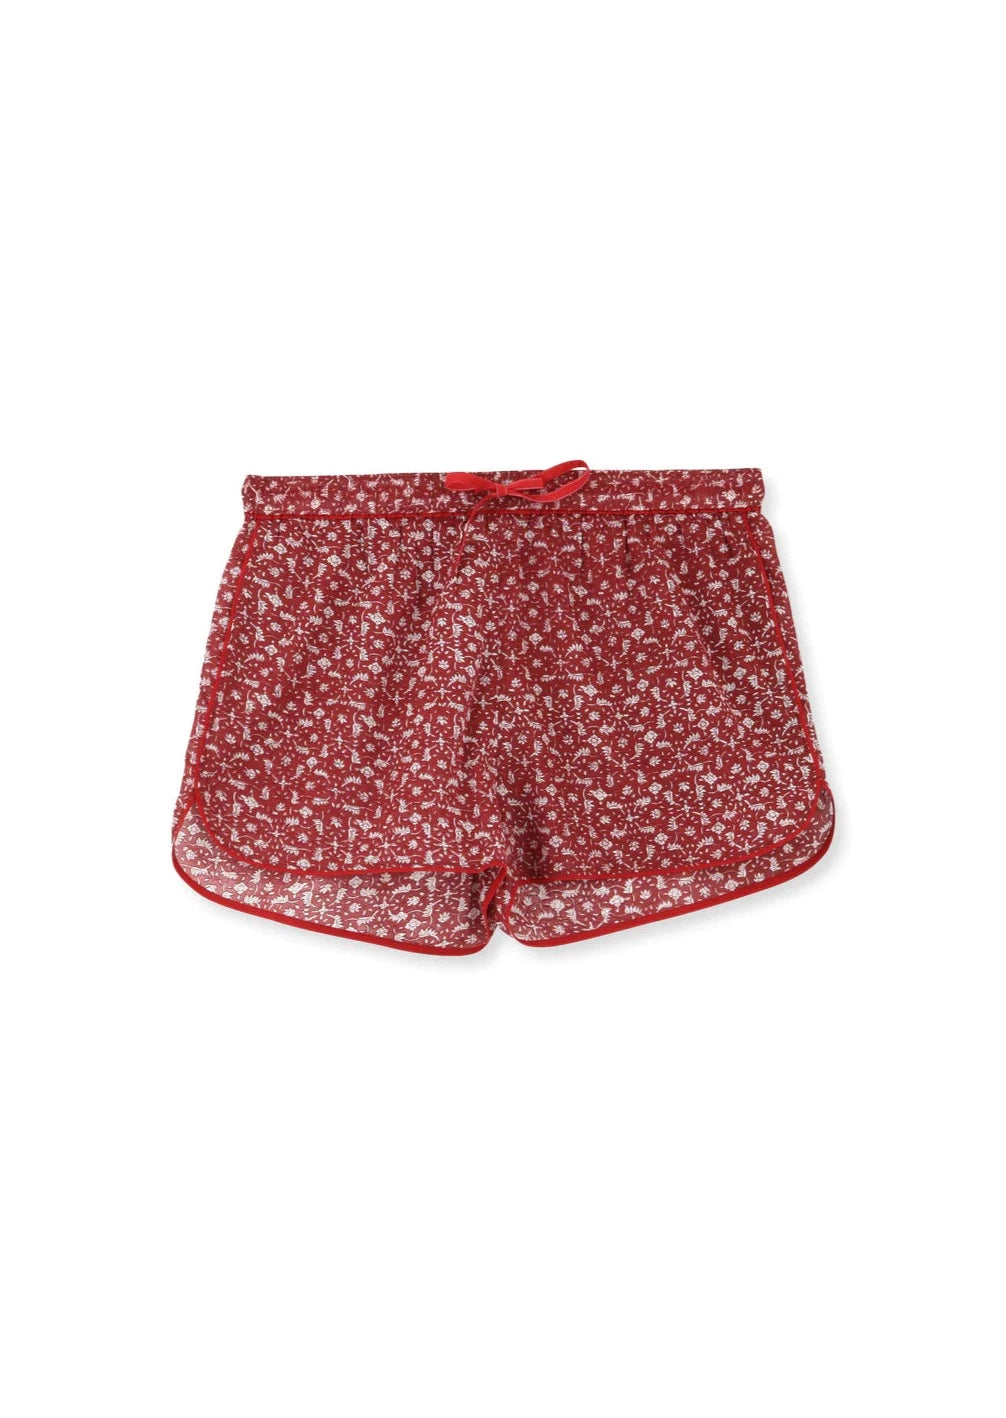 Short Marge Pajamas Scarlette Ateliers Marge Red S 